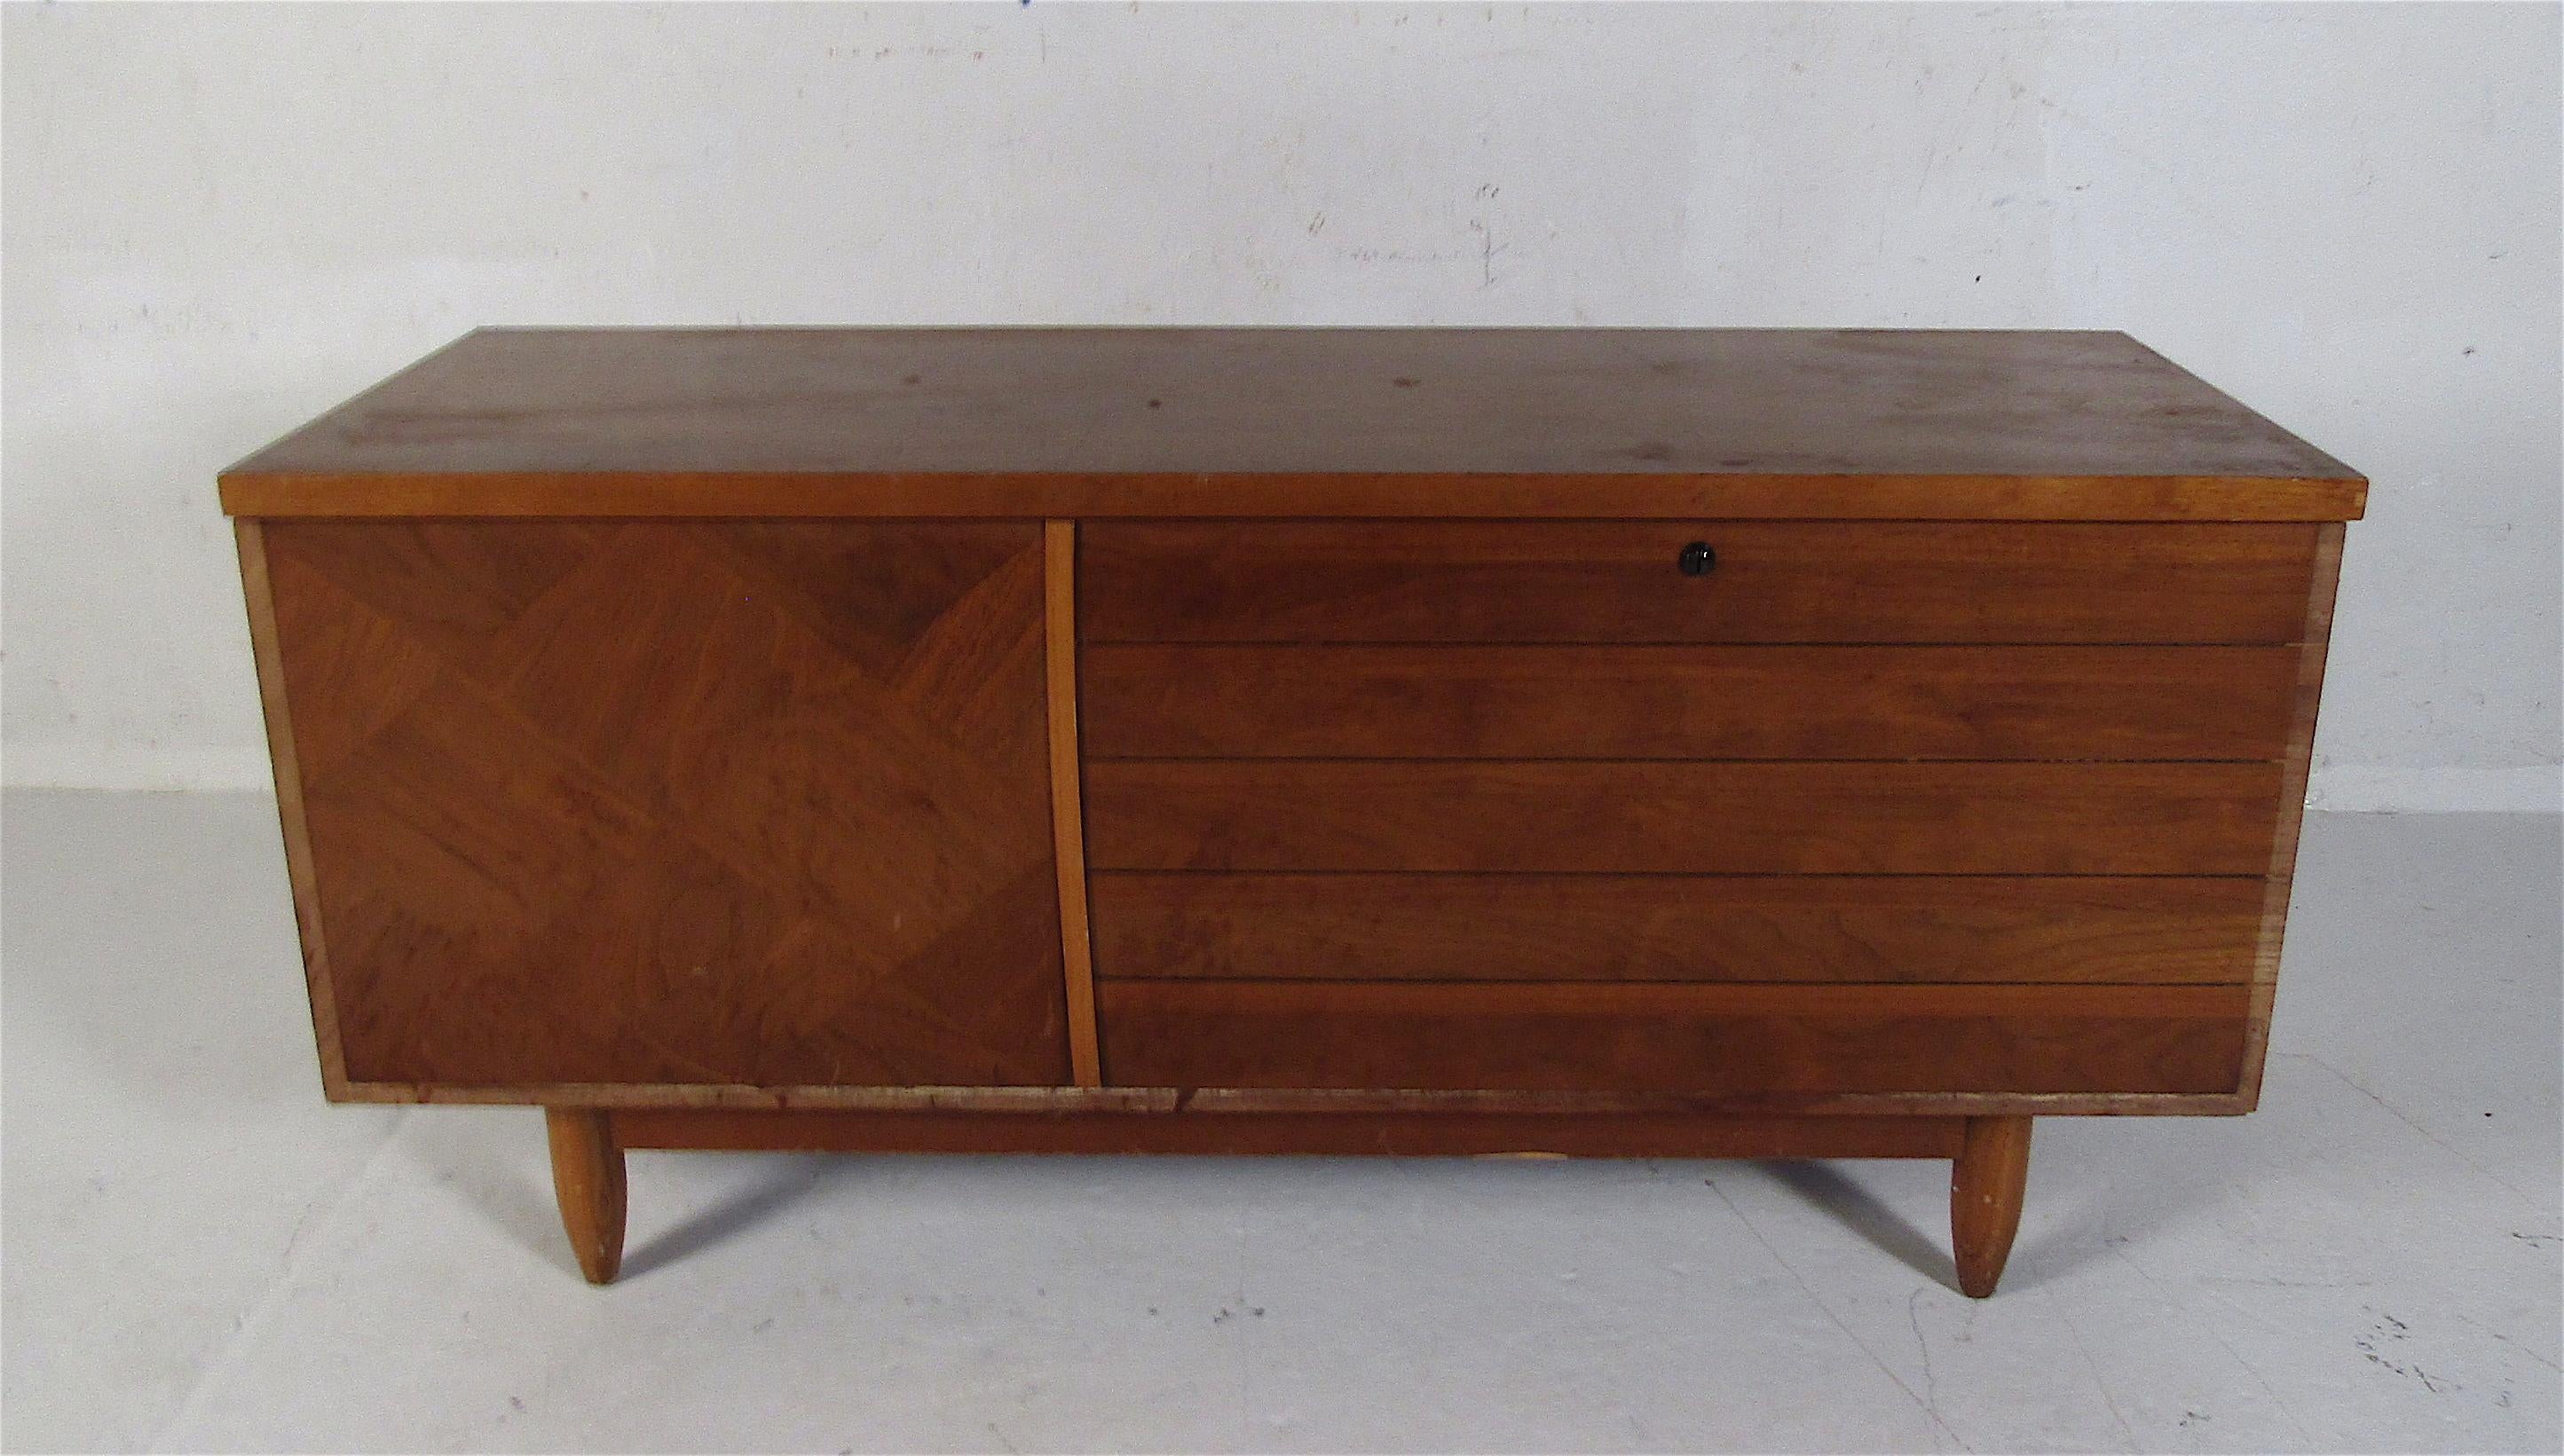 This beautiful vintage modern cedar chest was designed by Lane Furniture. An iconic piece that has a shelf that floats out when the top is lifted. The felt lining in the shelf, diamond inlaid woodgrain front, and stubby tapered legs show quality